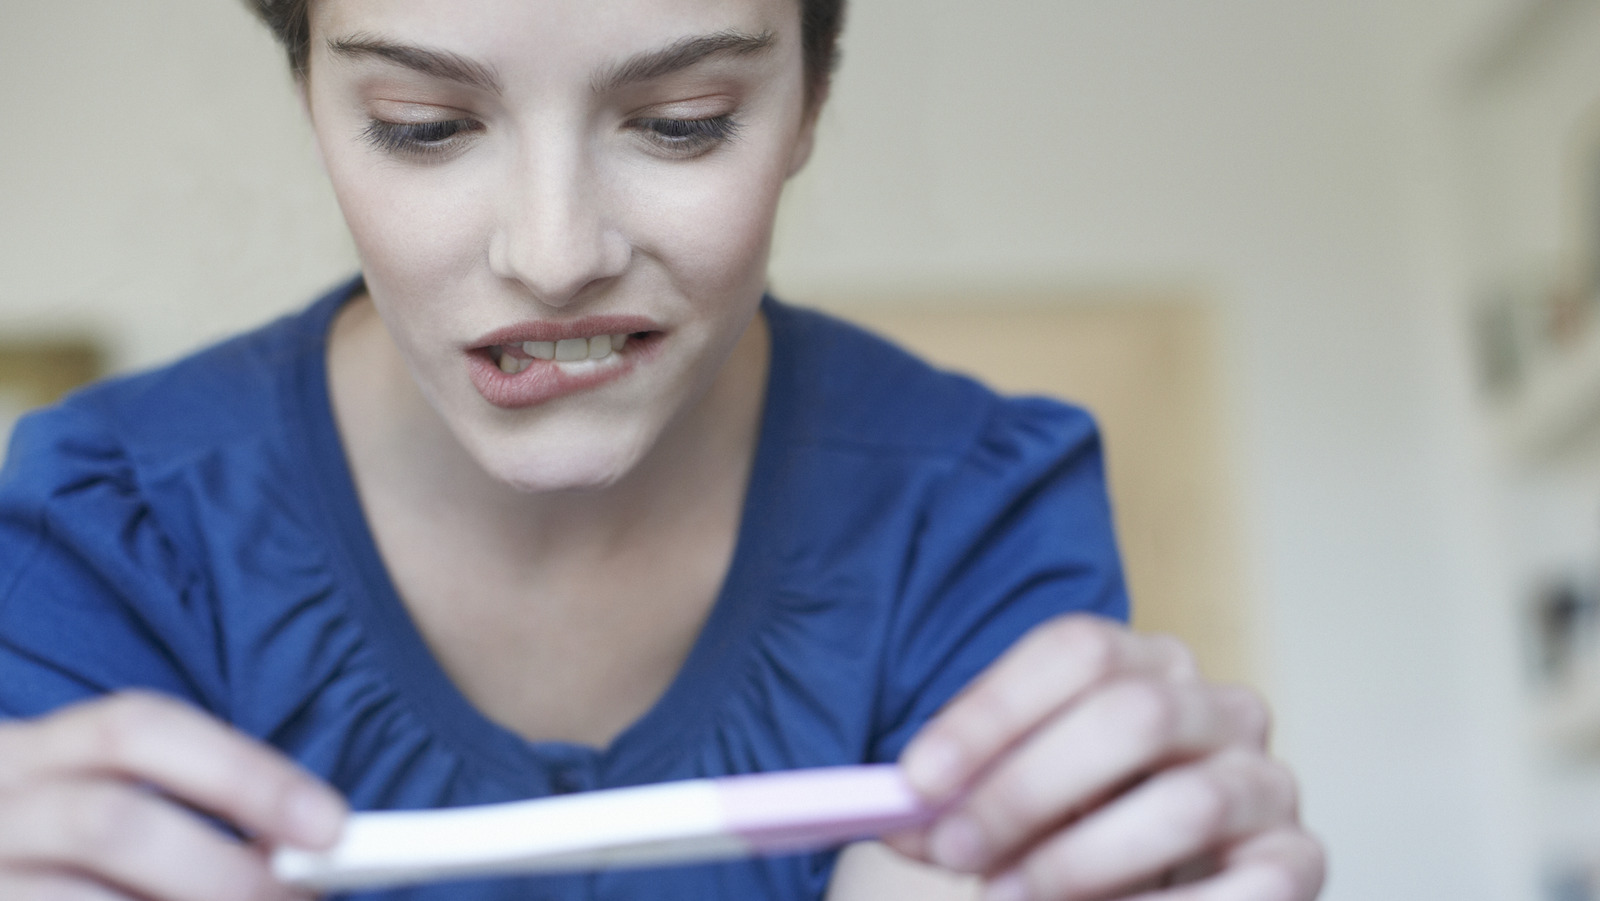 Tips To Let Your Partner Know About An Unplanned Pregnancy